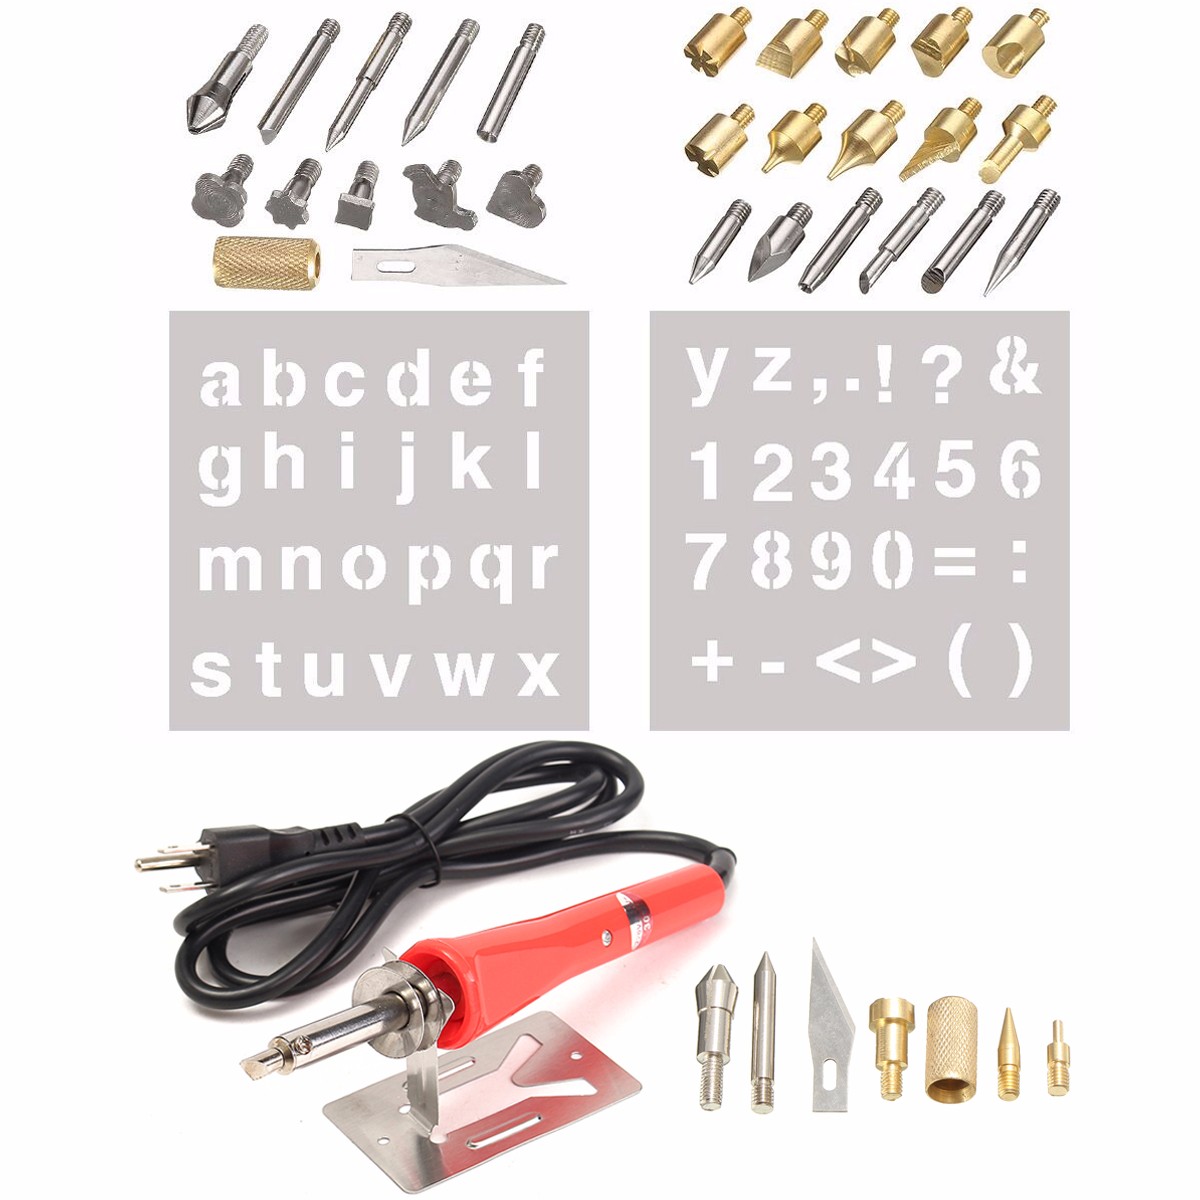 Test Equipment - 37pcs Wood Burning Pen with Extra Tips and Stencils 